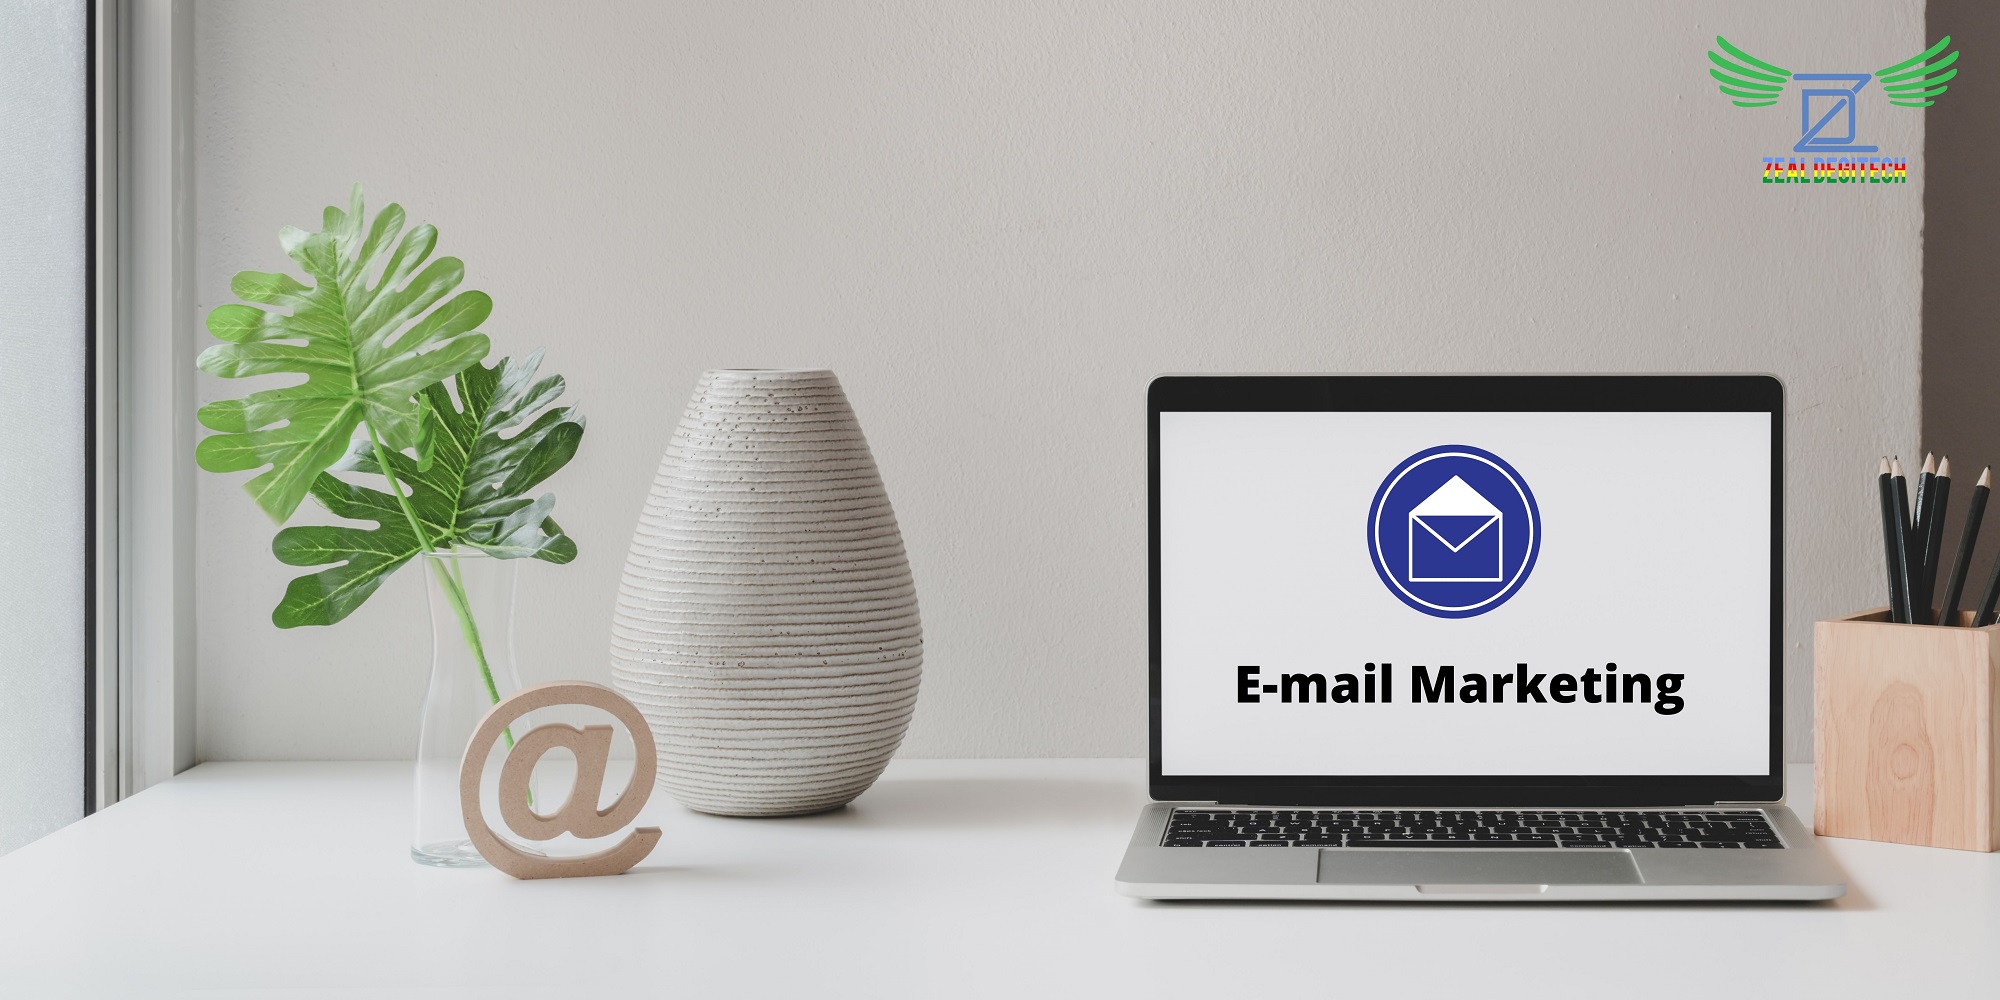 How Does Email Marketing Help to grow your business?